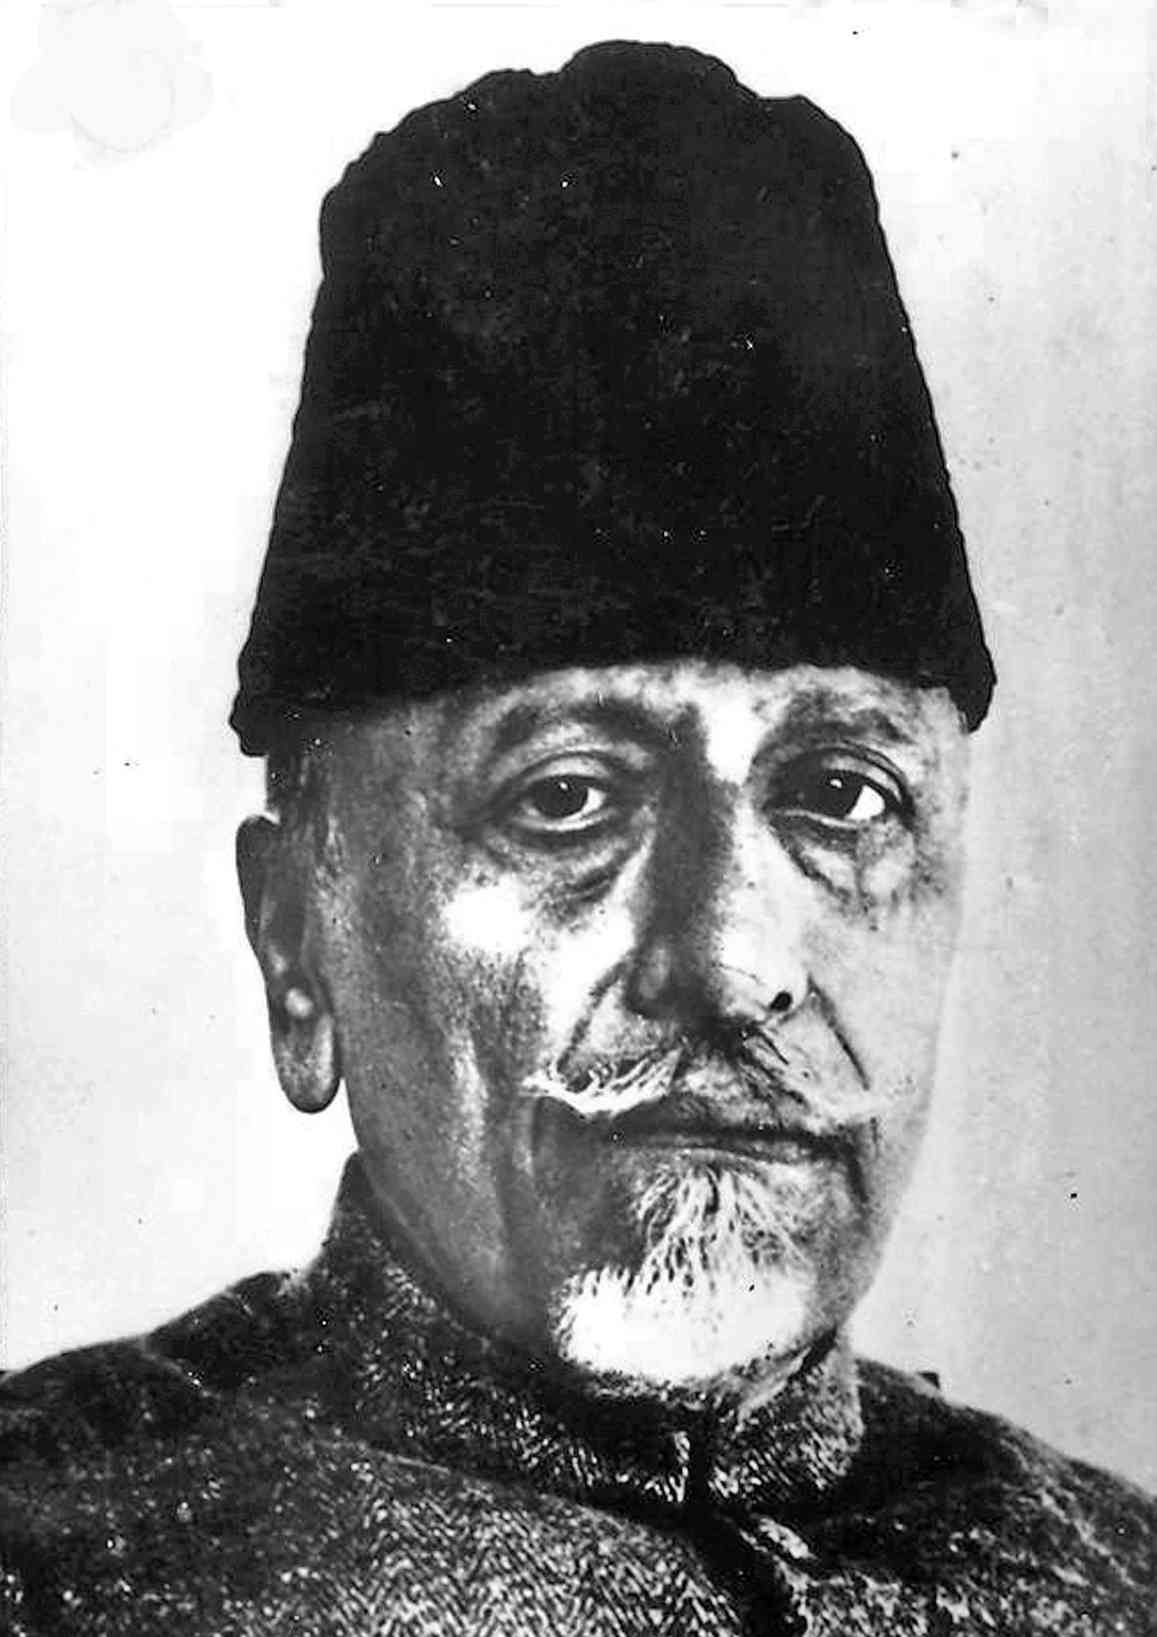 National Education Day is observed on 11 November every year to commemorate the birth anniversary of the first education minister of independent India, Maulana Abul Kalam Azad–the man responsible for spreading the light of education in India.  He served as the Education Minister from 1947 to 1958 and believed that education should be a fundamental right for every citizen of the country. Keeping his vision alive, on this National Education Day 2022 here's looking at a few interesting facts about Maulana Abul Kalam Azad: